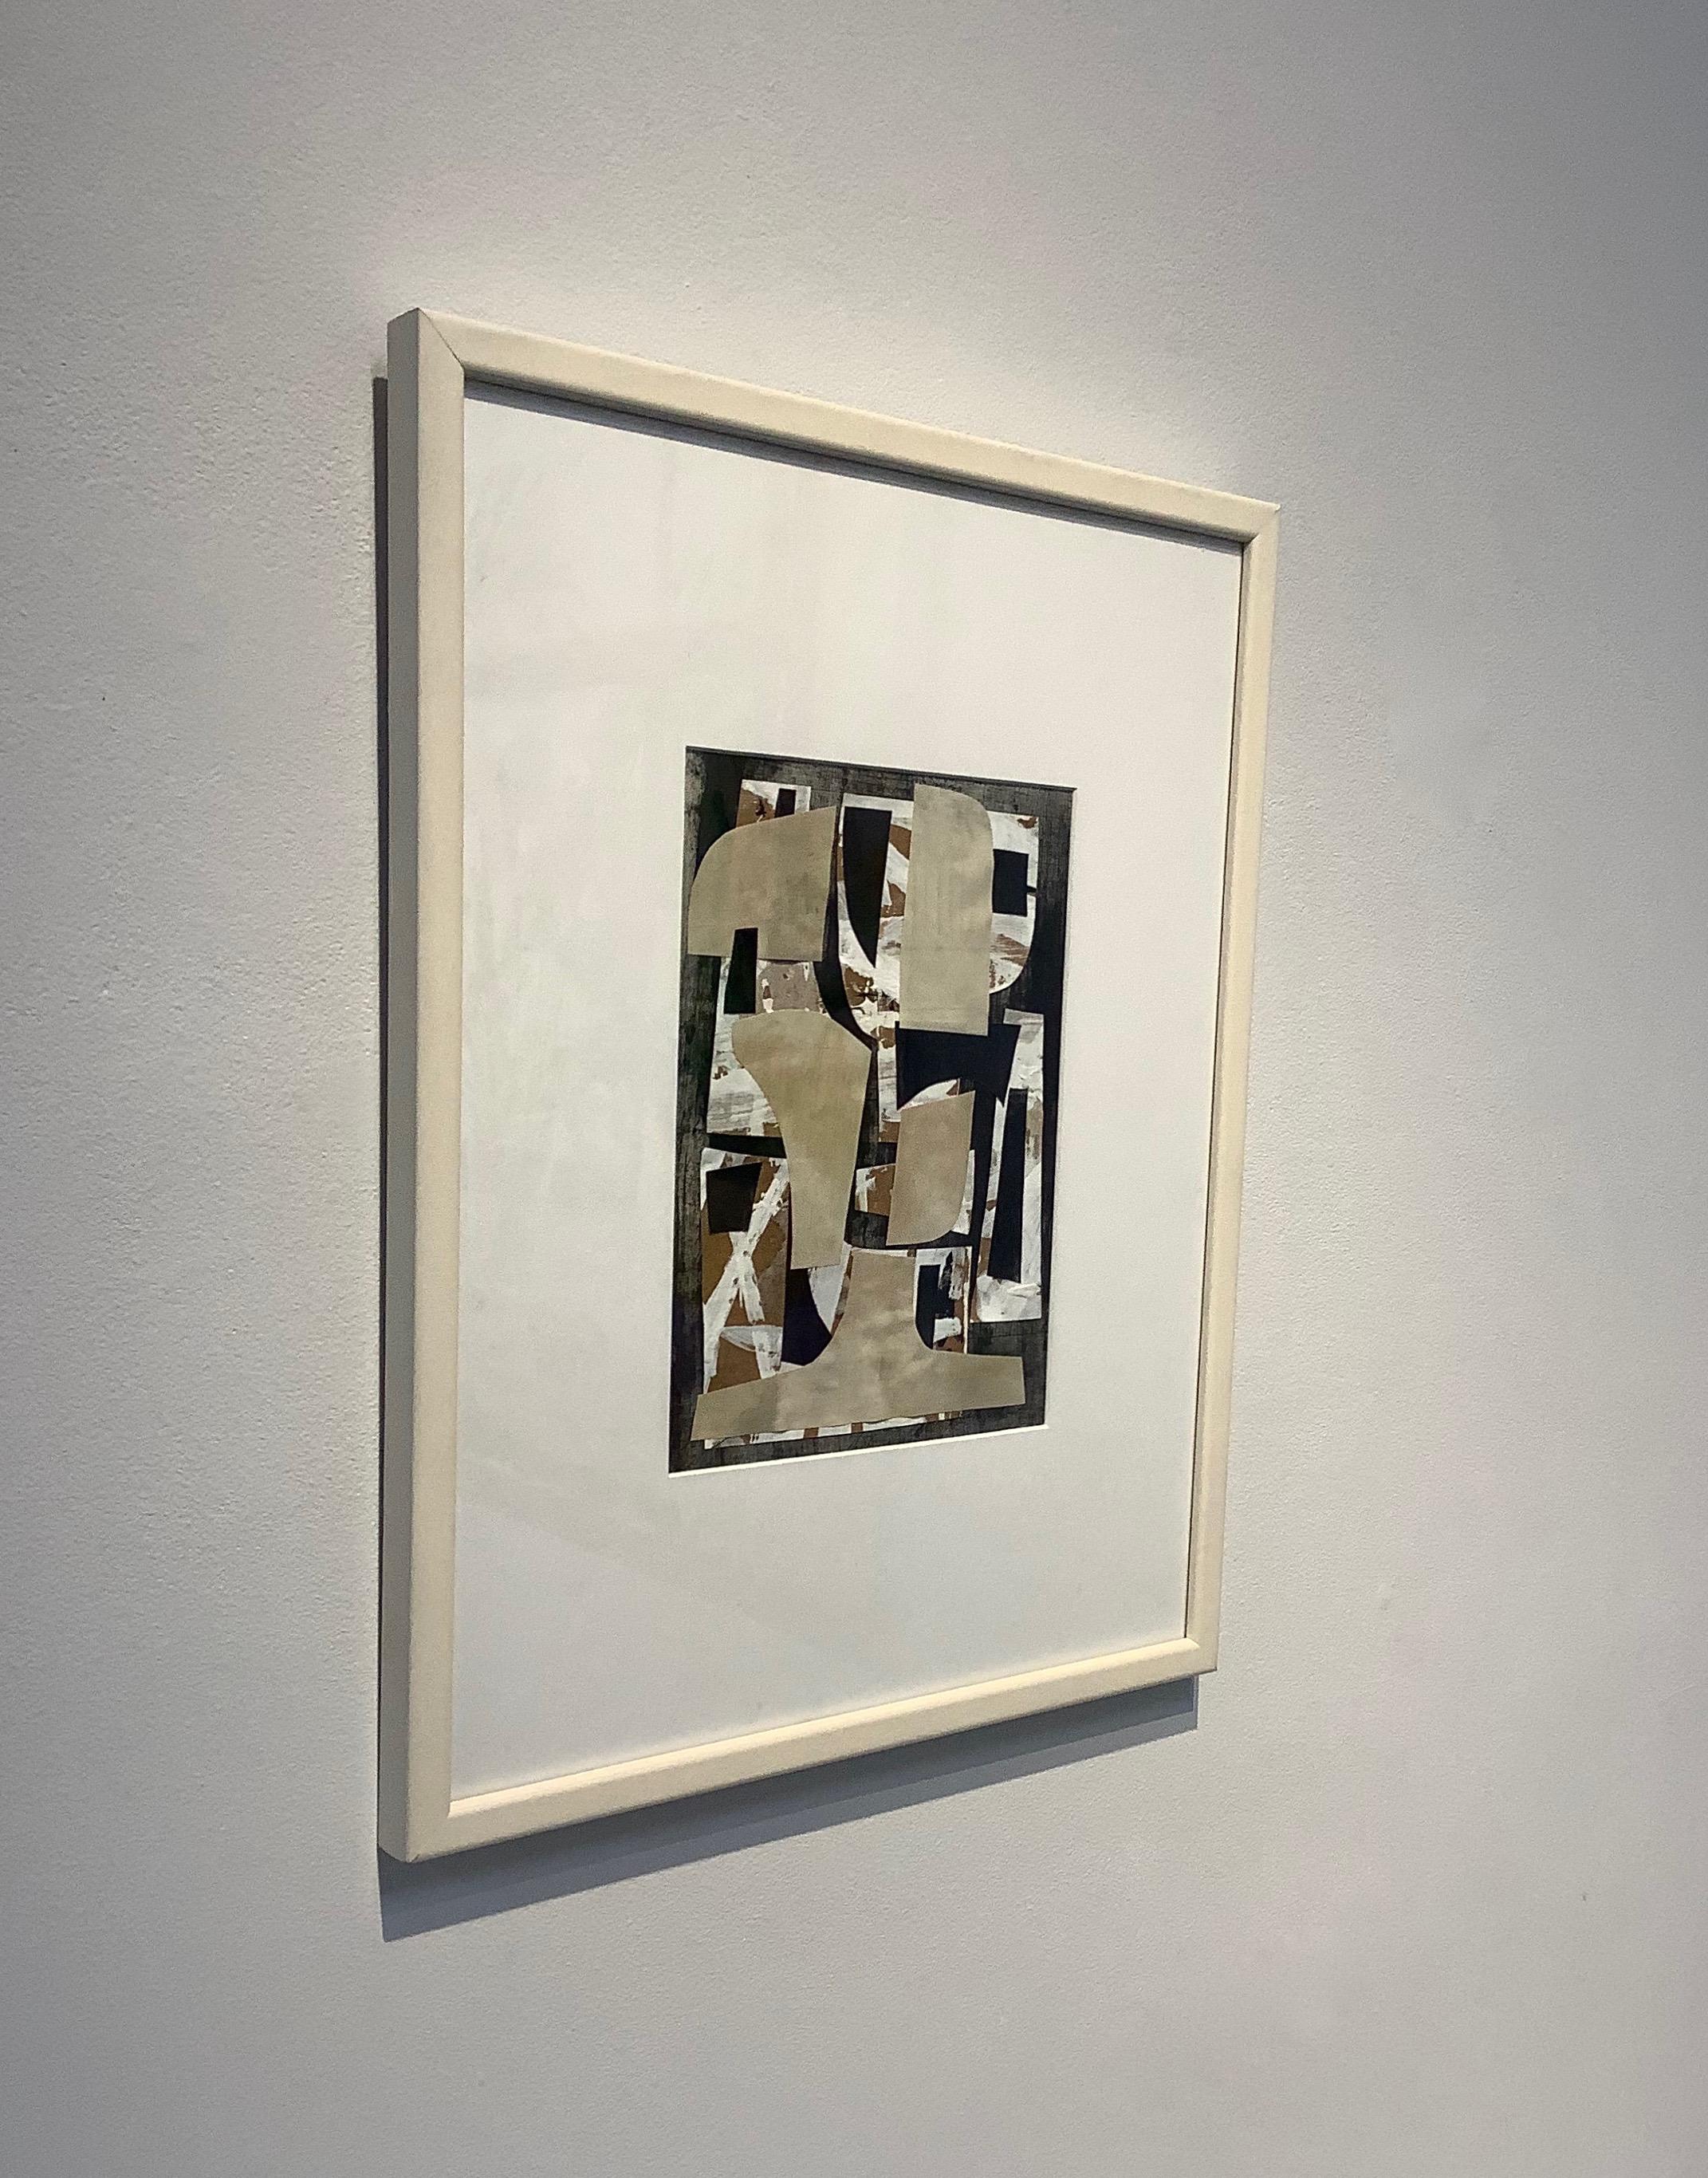 Daniel Anselmi uses painting and collage to explore the various ways in which color, line, and form can be expressed abstractly. 

In this vertical painted paper collage on paper, smooth curvilinear and sharp angular forms intersect and overlap one